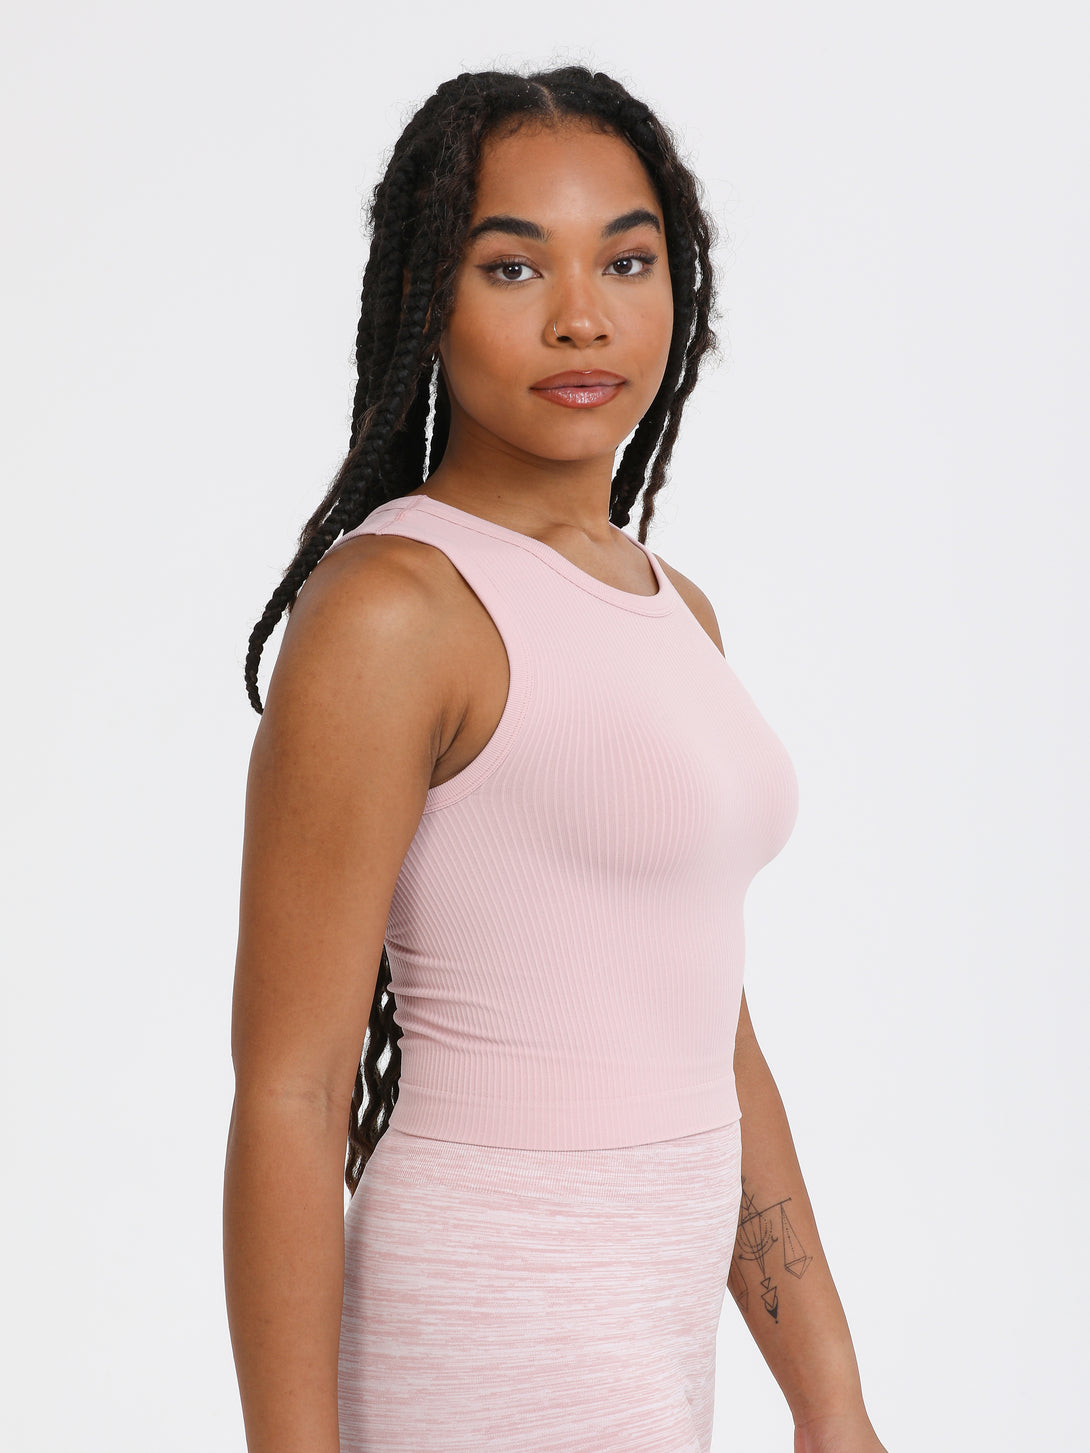 A Woman Wearing Pale Mauve Color All-Day Sleeveless Strapped Crop Top